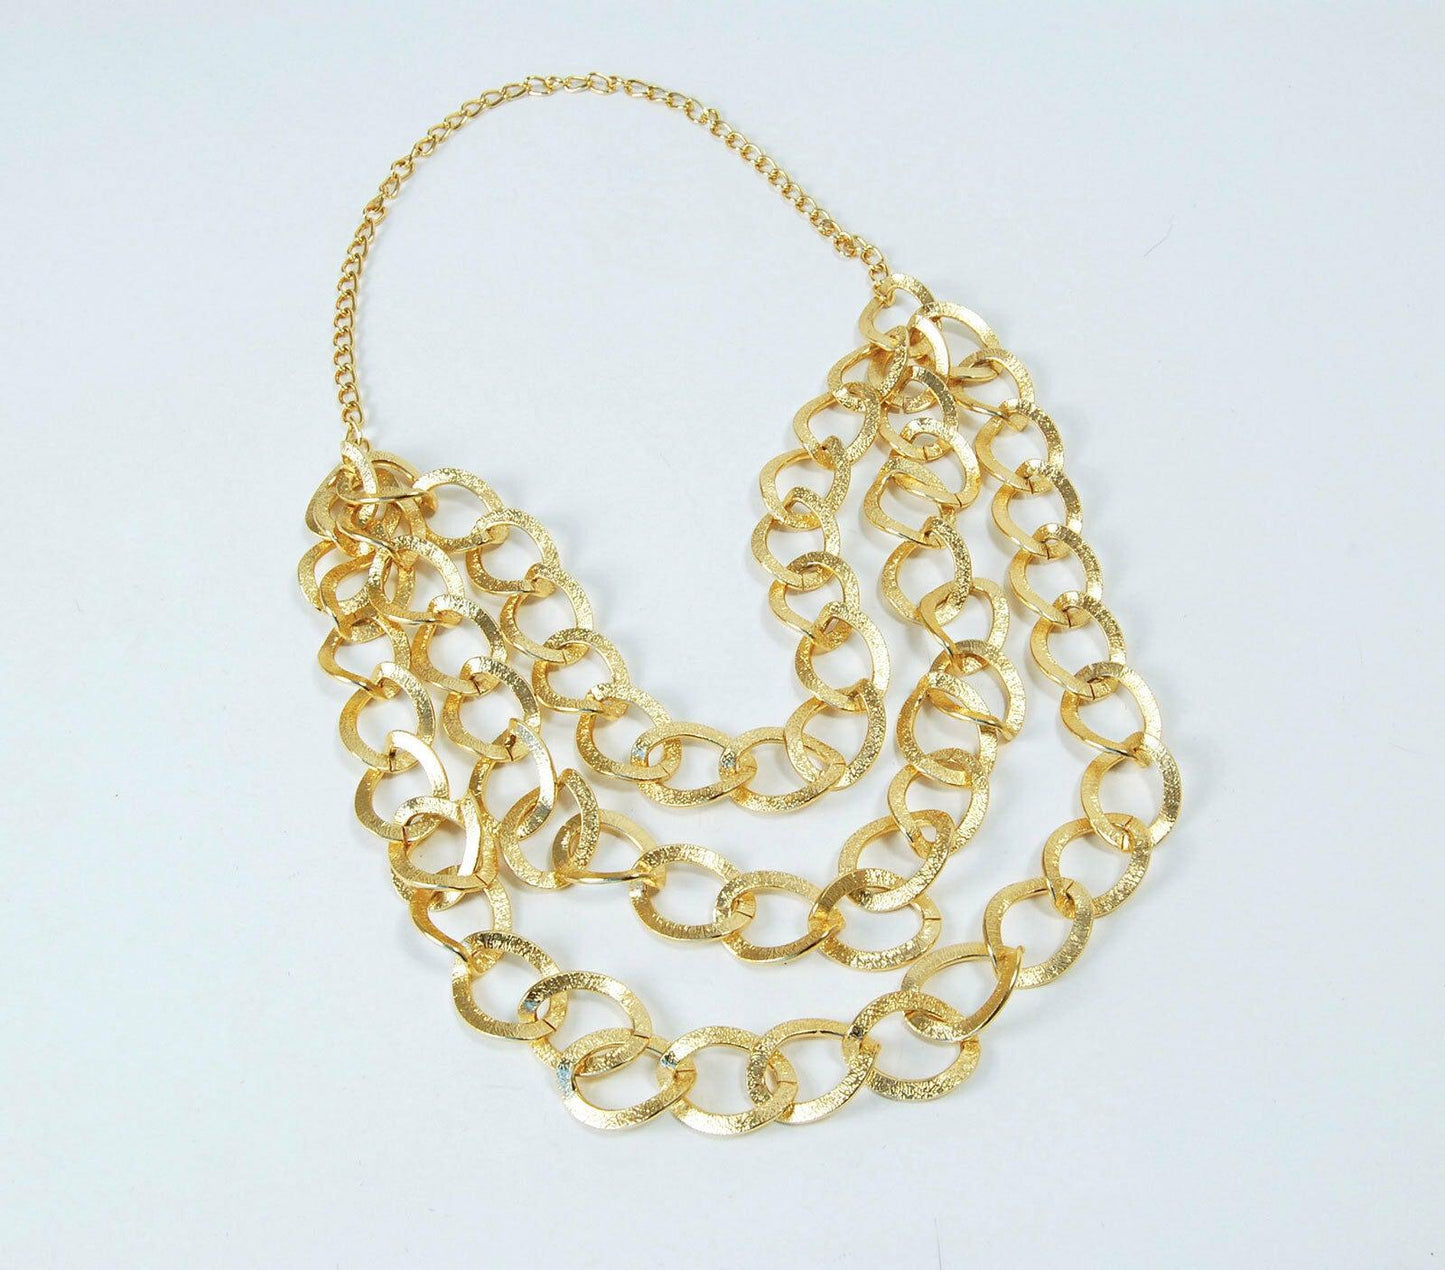 Mr Bling Chunky Gold Chain with Three Strands 1970’s Fancy Dress Accessory - Labreeze